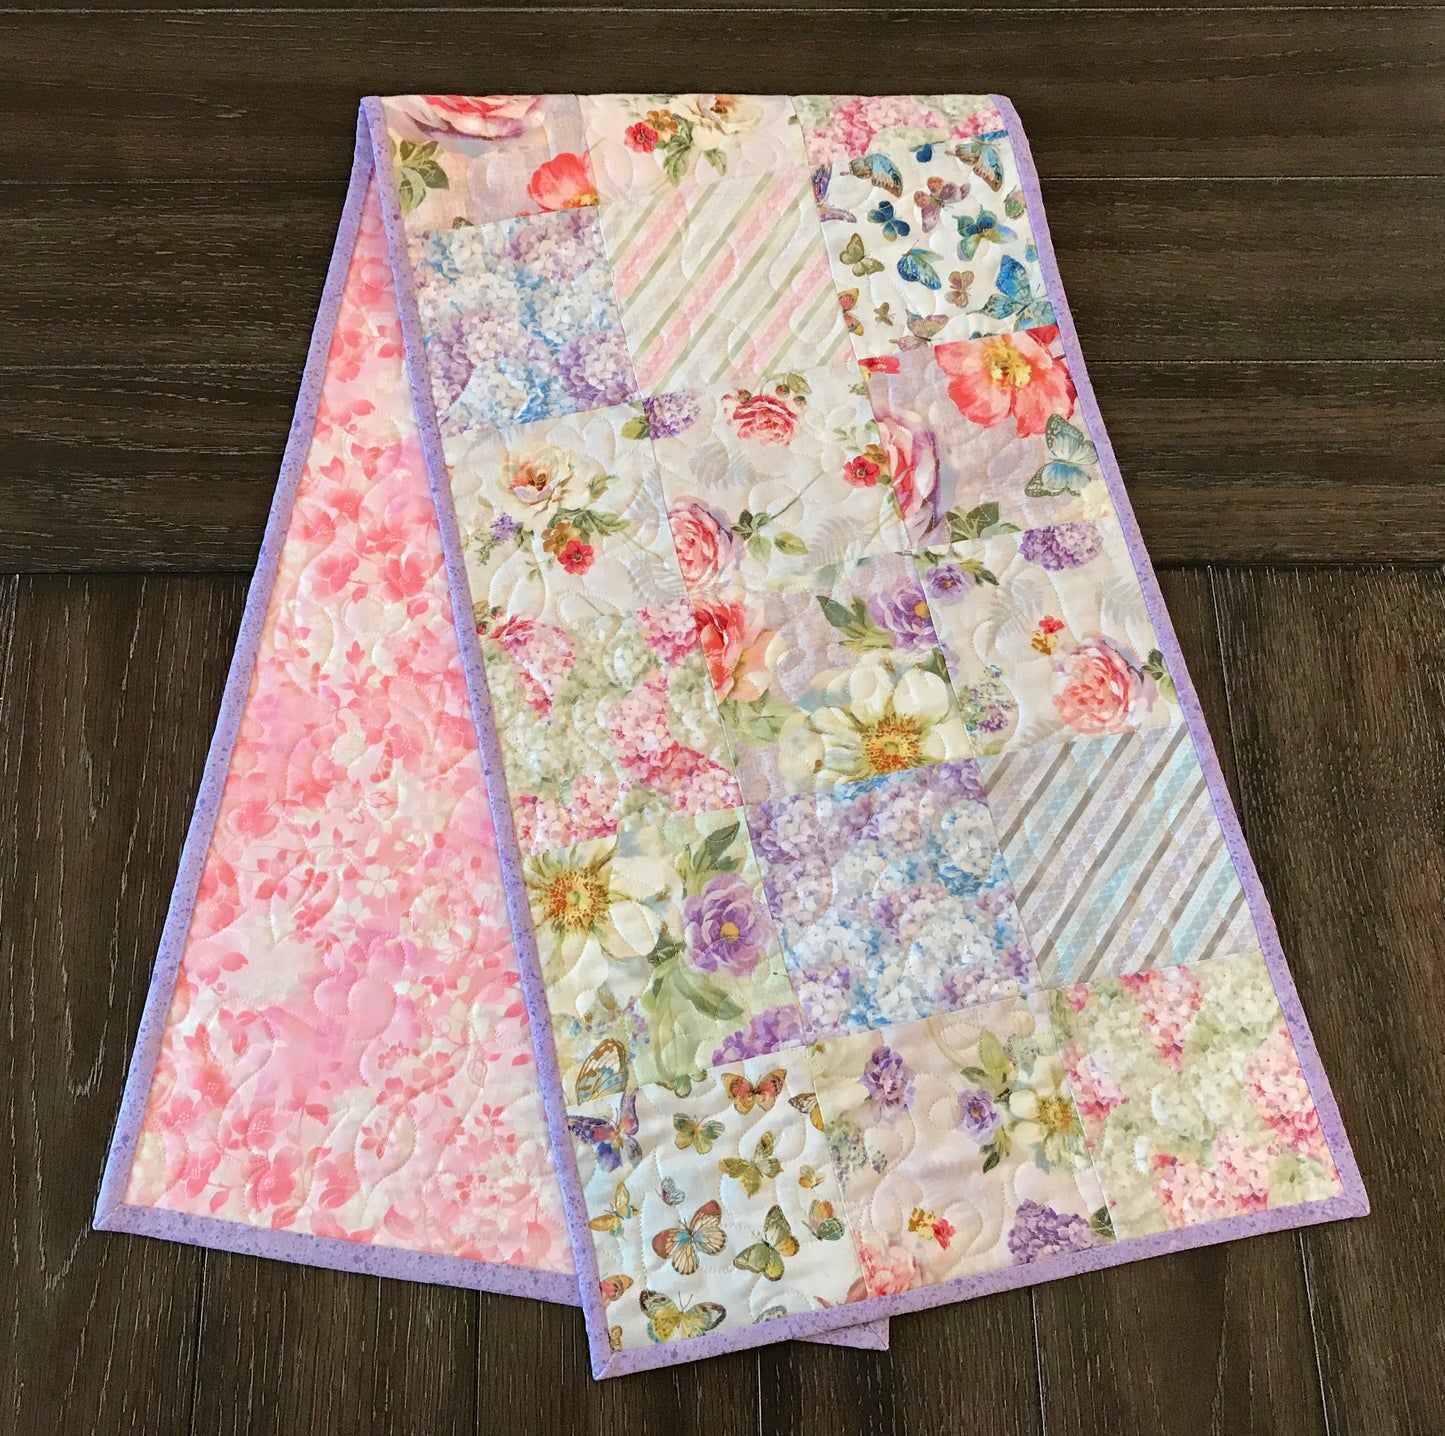 Butterfly Floral Patchwork Table Runner - Handmade Quilts, Digital Patterns, and Home Décor items online - Cuddle Cat Quiltworks